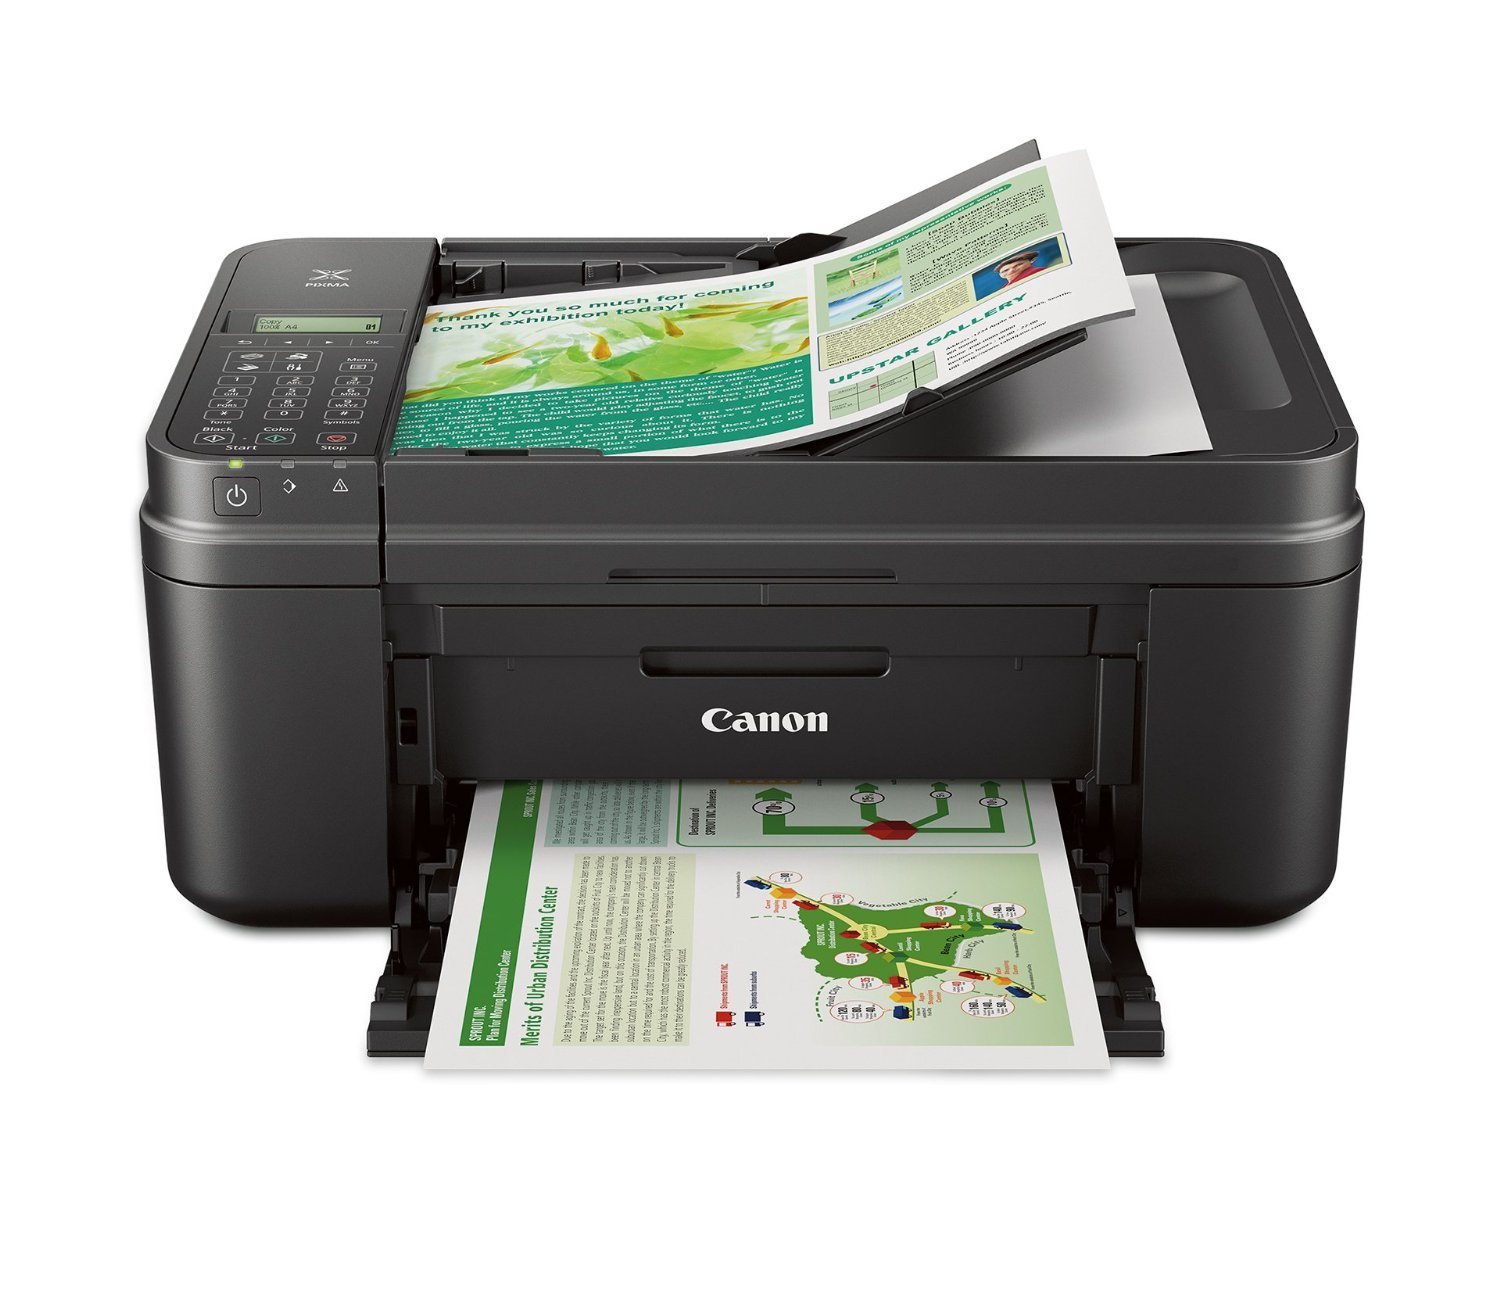 How to Install Canon PIXMA MX490 Series Printer/Scanner in Mint GNU/Linux - Featured